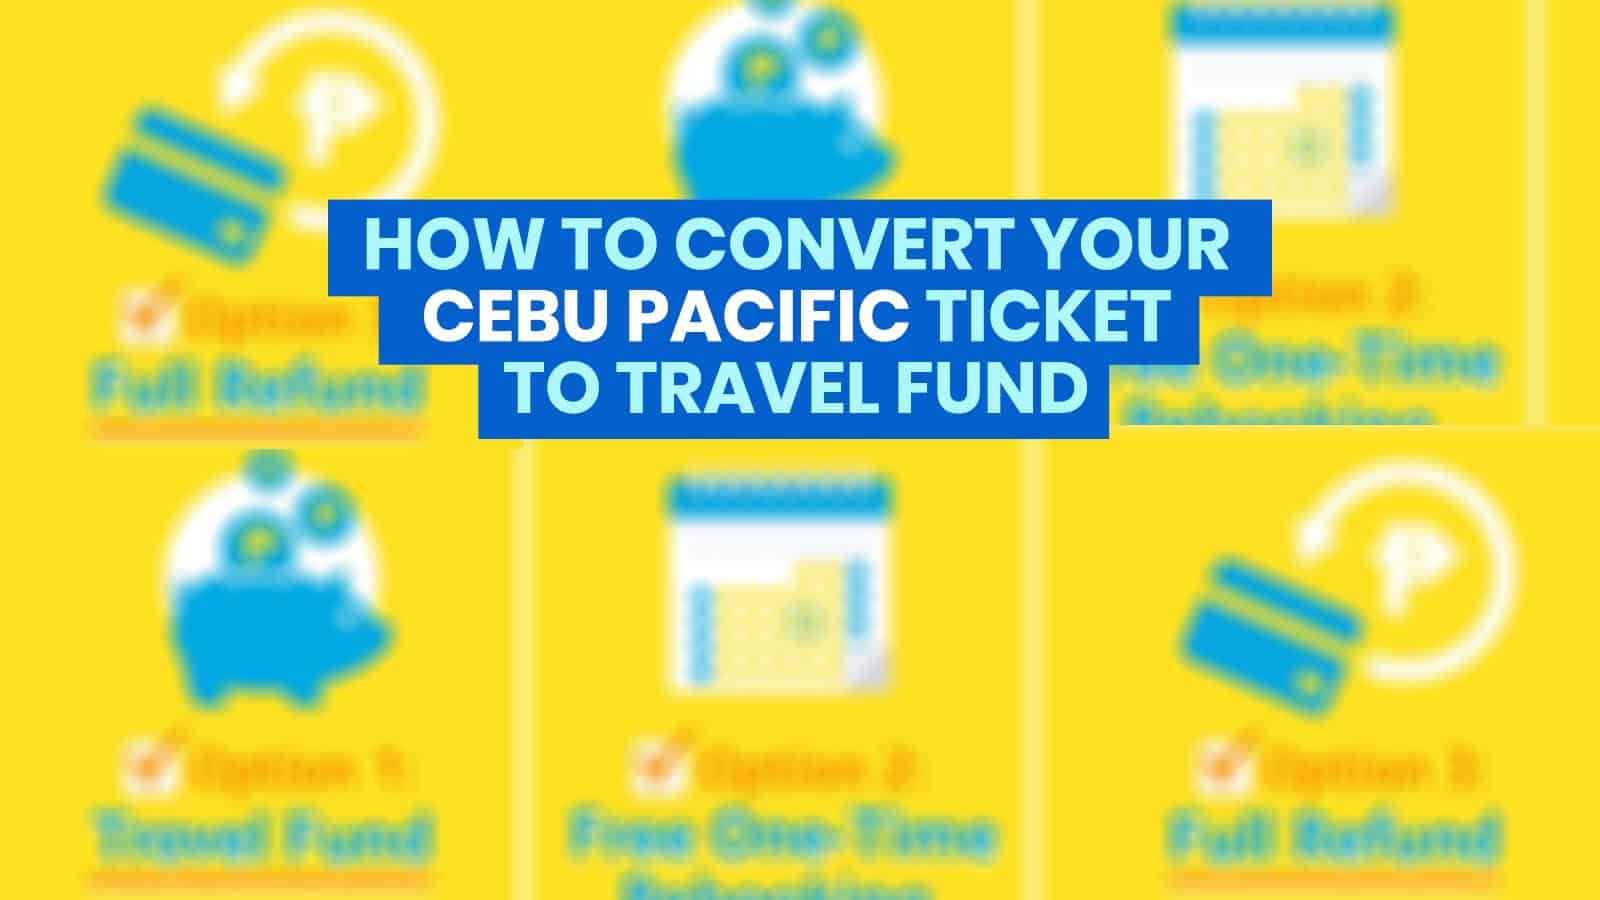 CEBU PACIFIC: How to Convert Your Ticket to a TRAVEL FUND